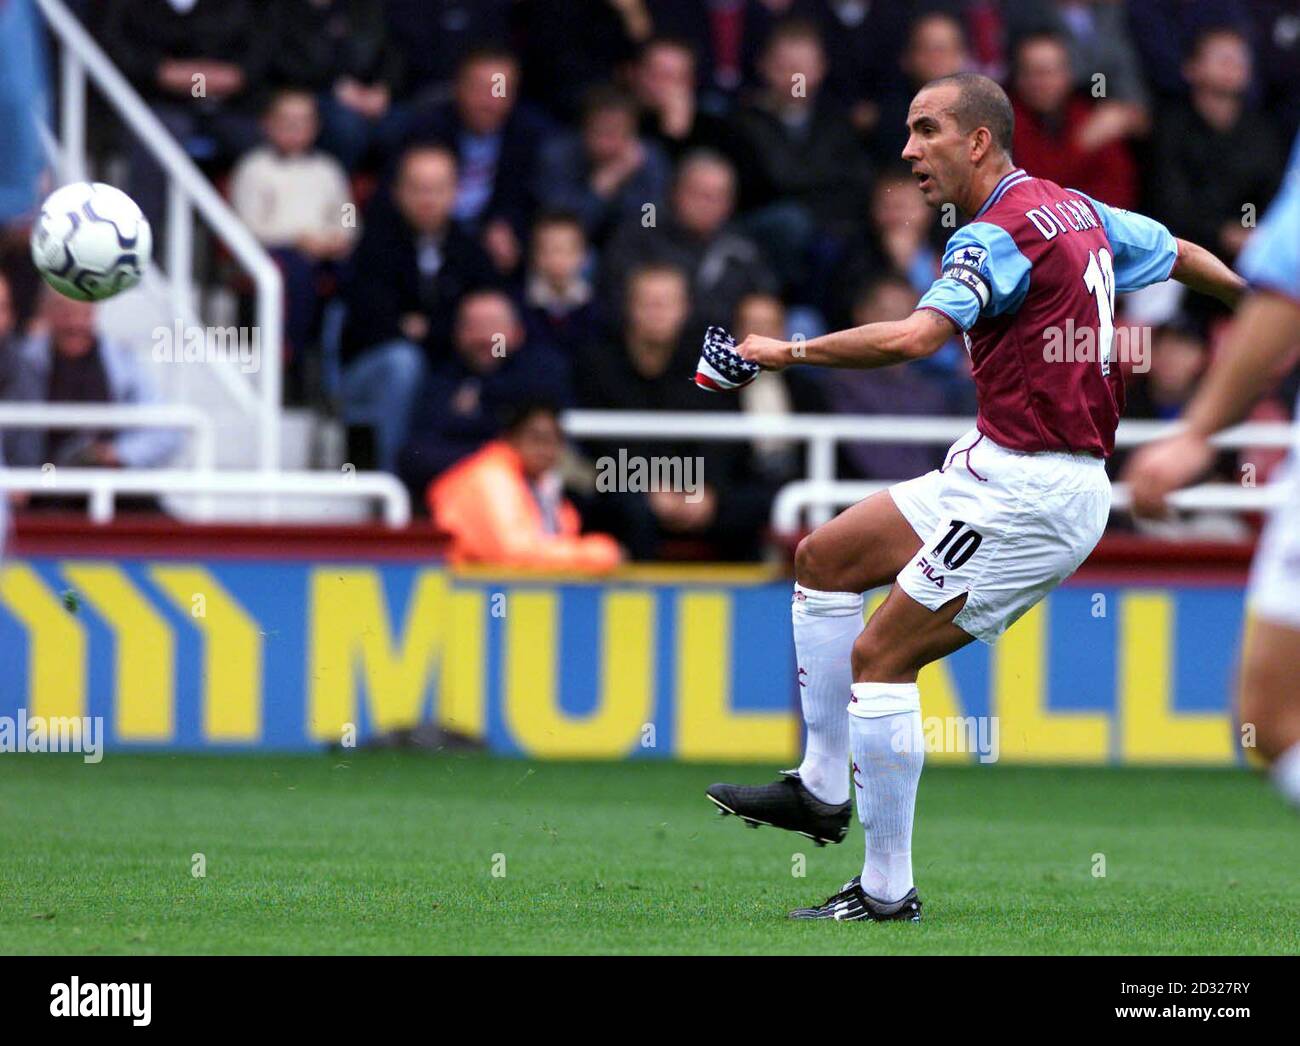 West Ham Uniteds Paolo Di Canio holds American Stars and Stripes flag in his left hand as he takes a free kick during the FA Barclaycard Premiership match against Newcastle United at